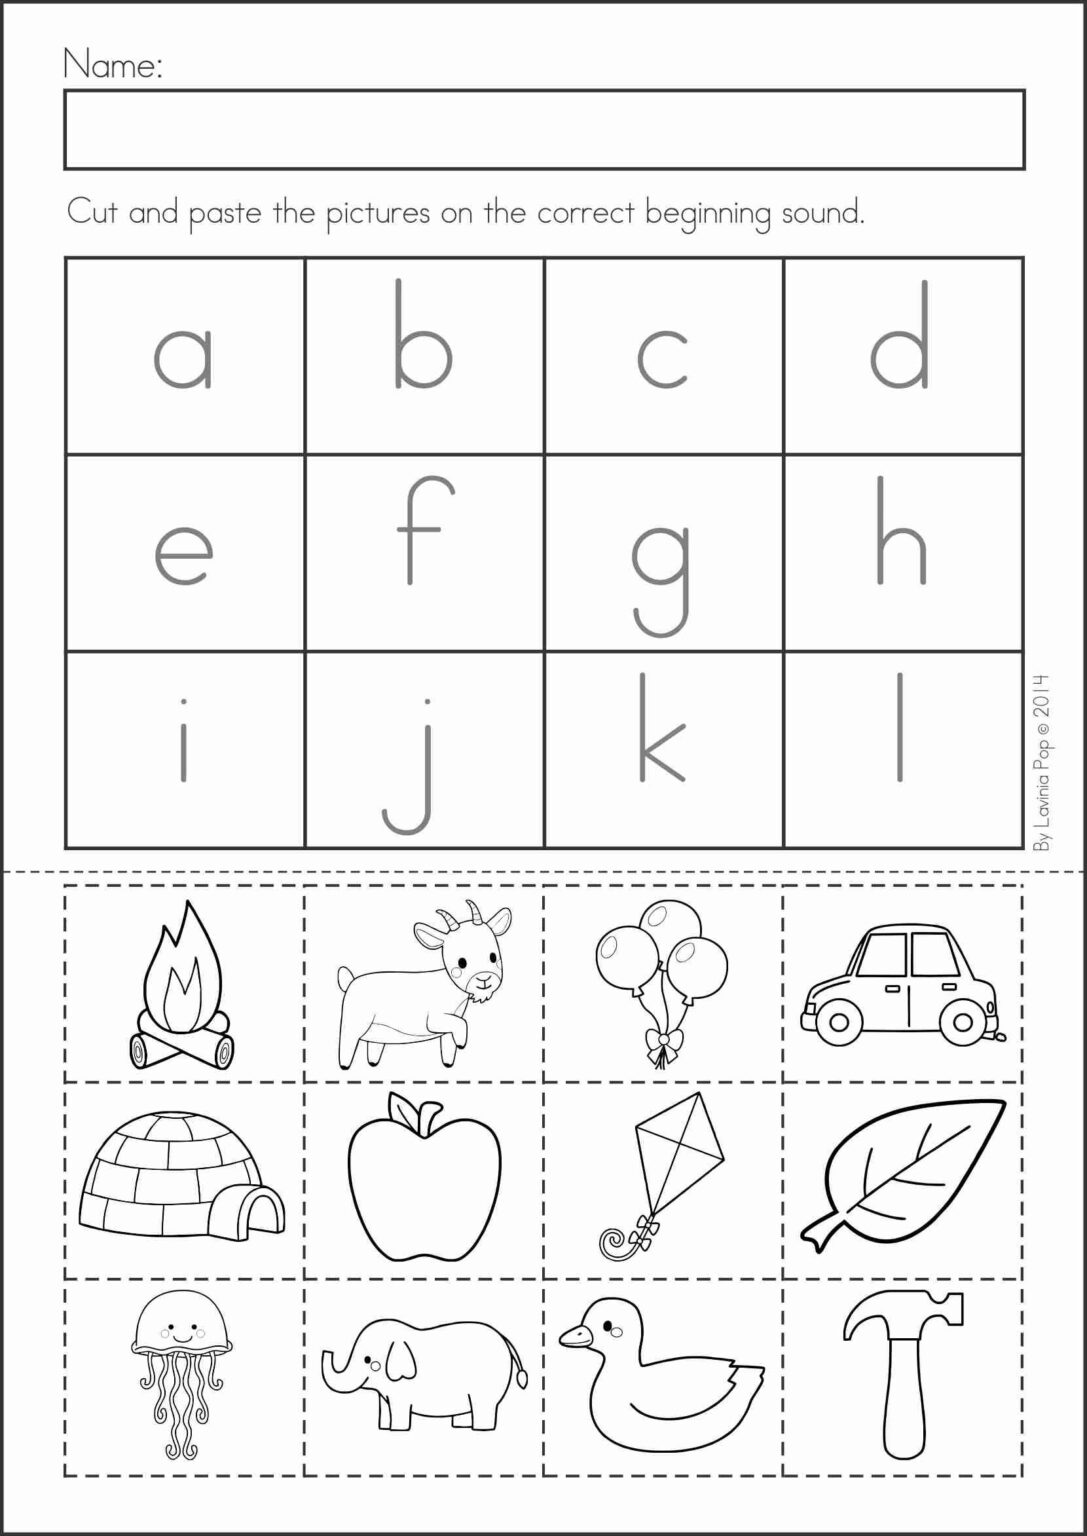 free-printable-cut-and-paste-worksheets-for-second-grade-printable